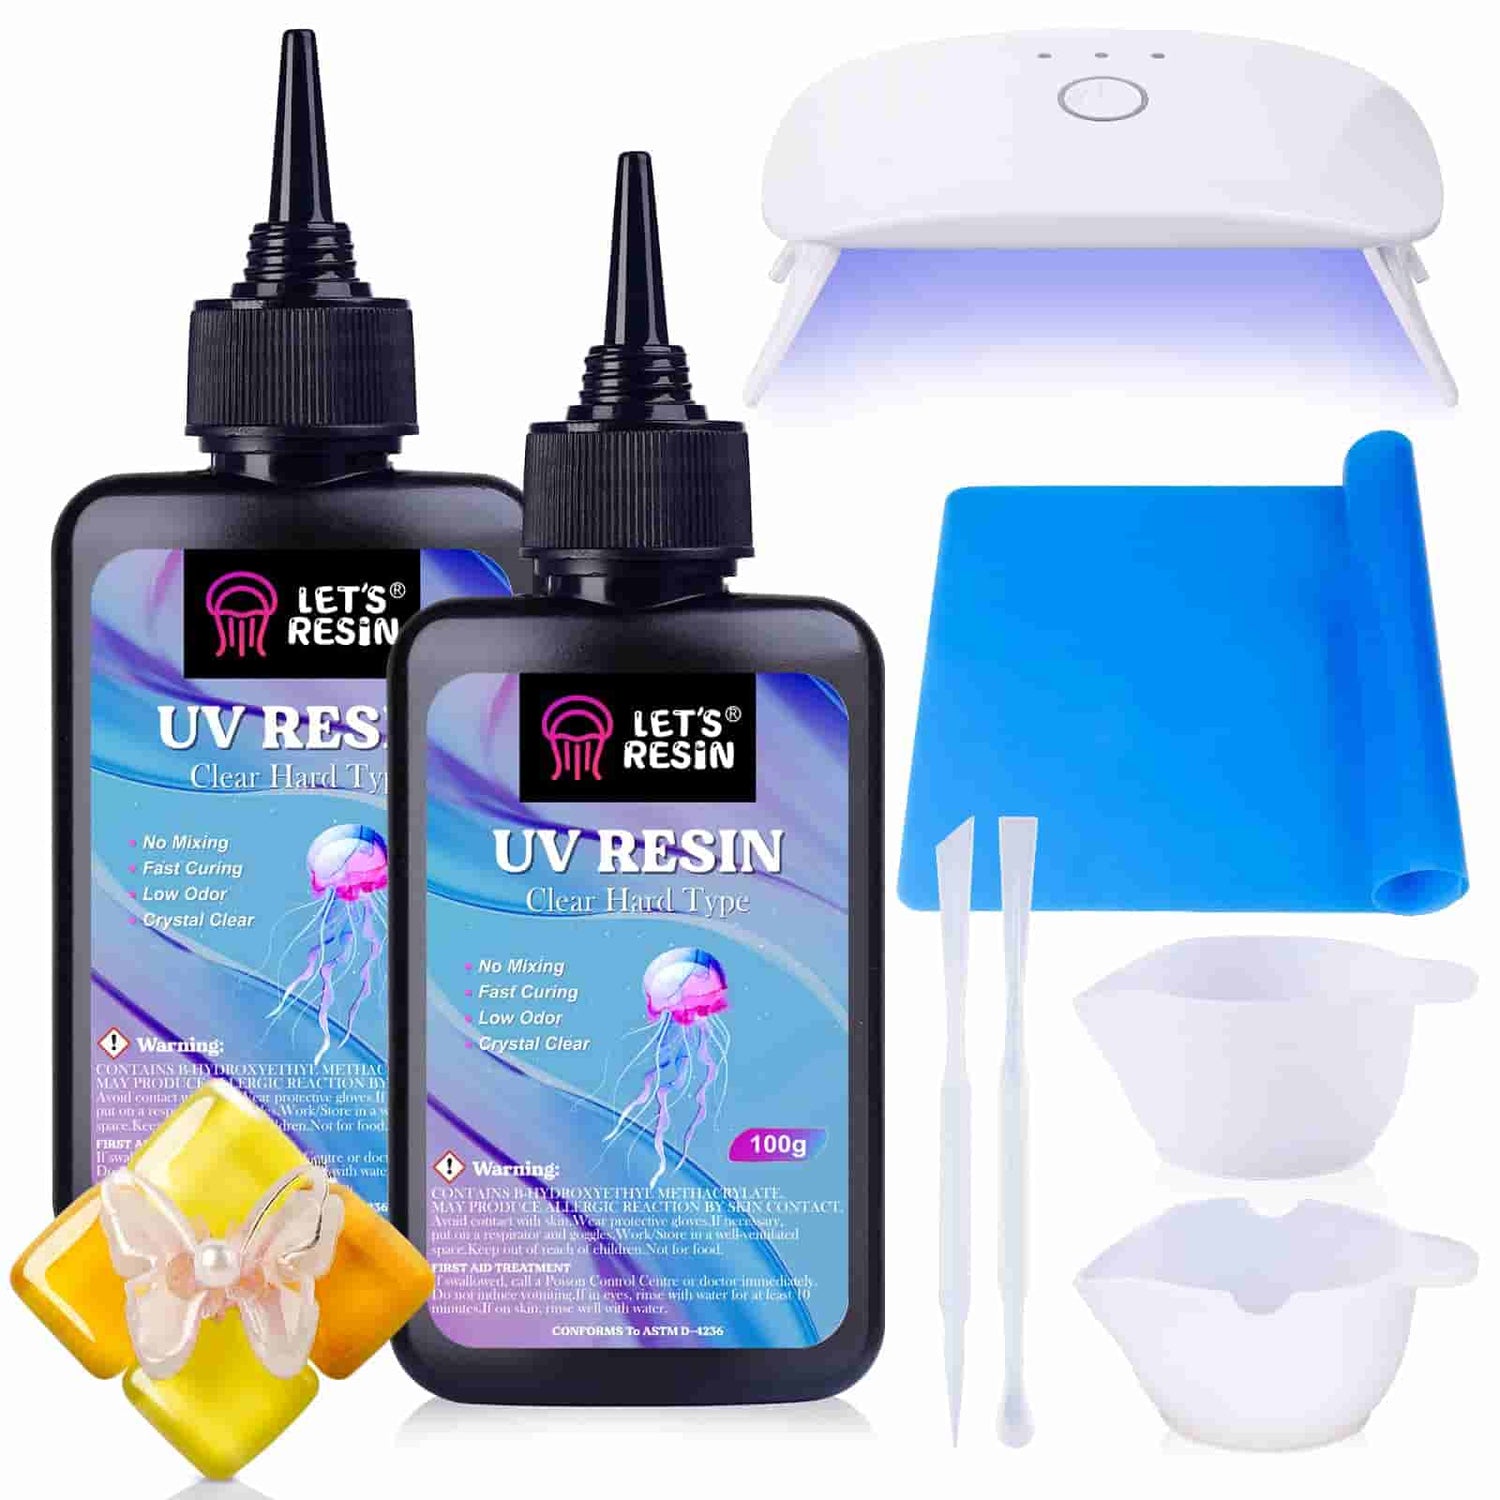 LET'S RESIN UV Resin Kit Bundle with 80oz Crystal Clear Epoxy Resin,  Bubbles Free Resin for Resin Art